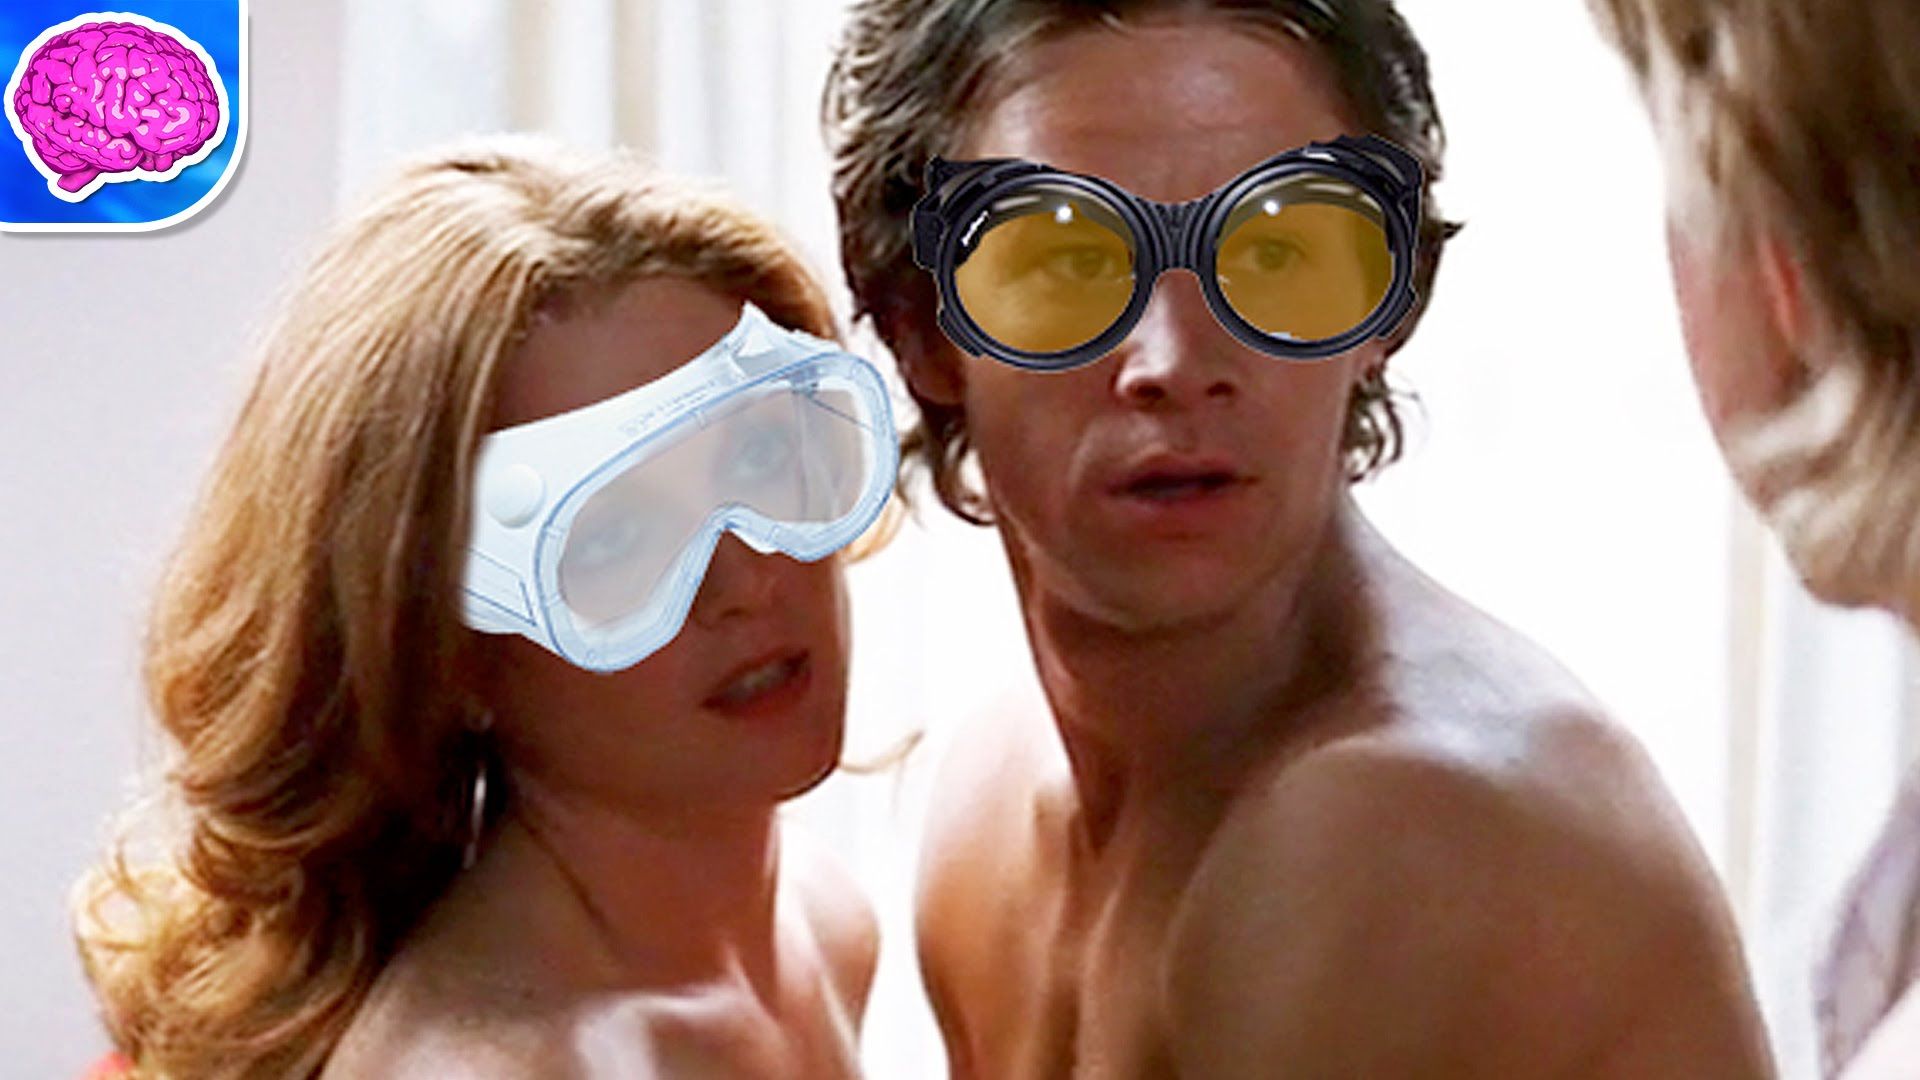 Needed goggles this